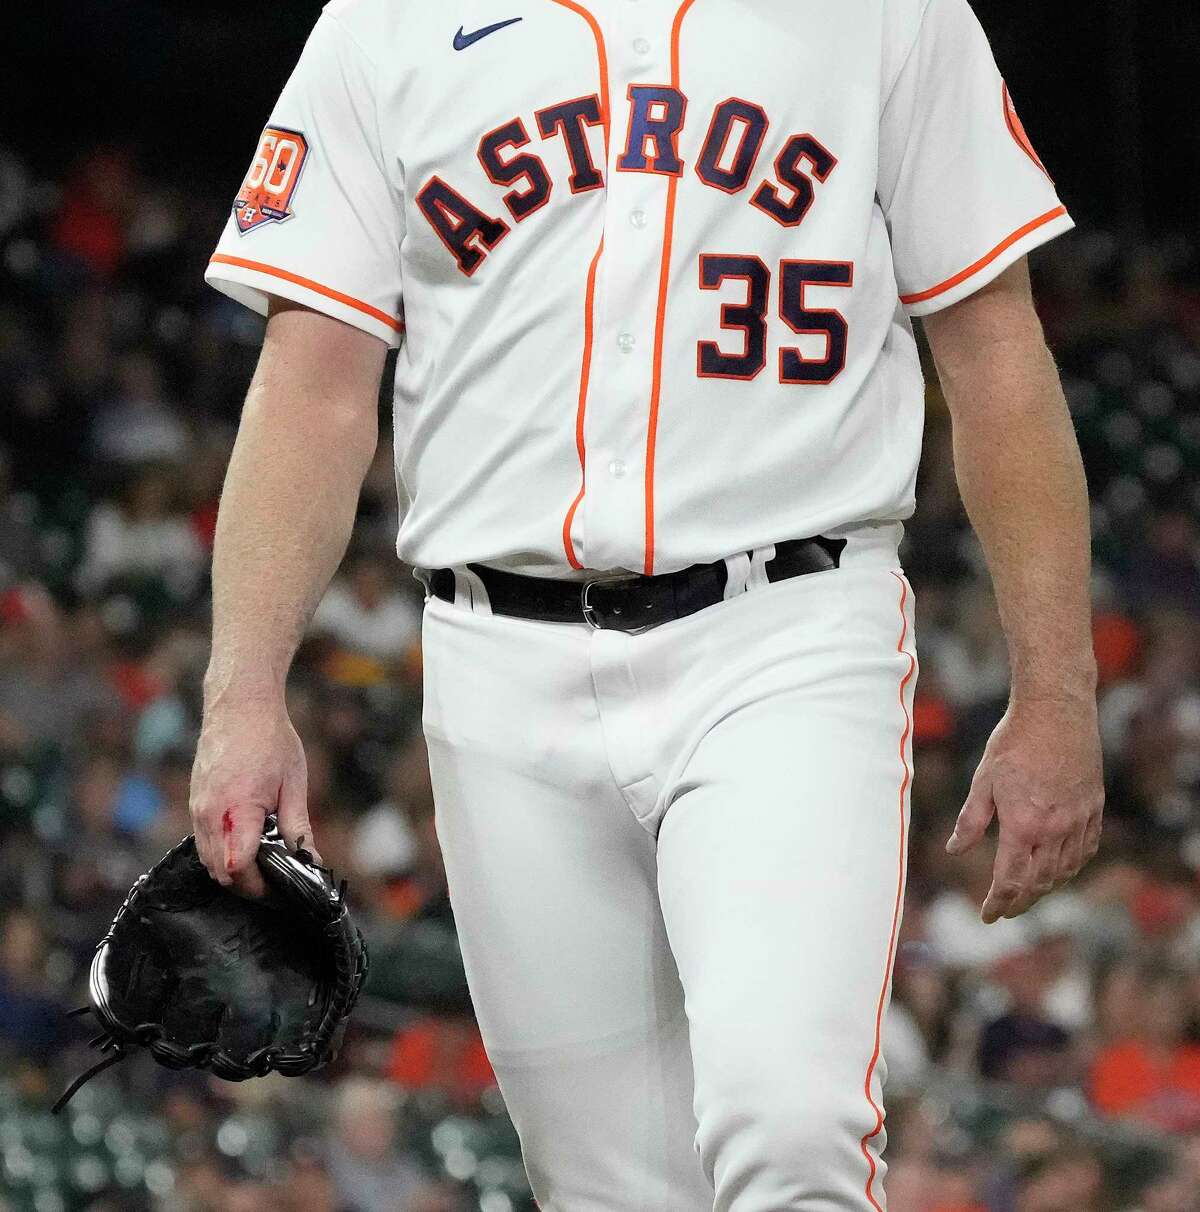 Houston Astros starting pitcher Justin Verlander (35) walks back to the dugout with blood on his right hand after striking out Philadelphia Phillies Nick Maton during the second inning of an MLB baseball game at Minute Maid Park on Tuesday, Oct. 4, 2022 in Houston.